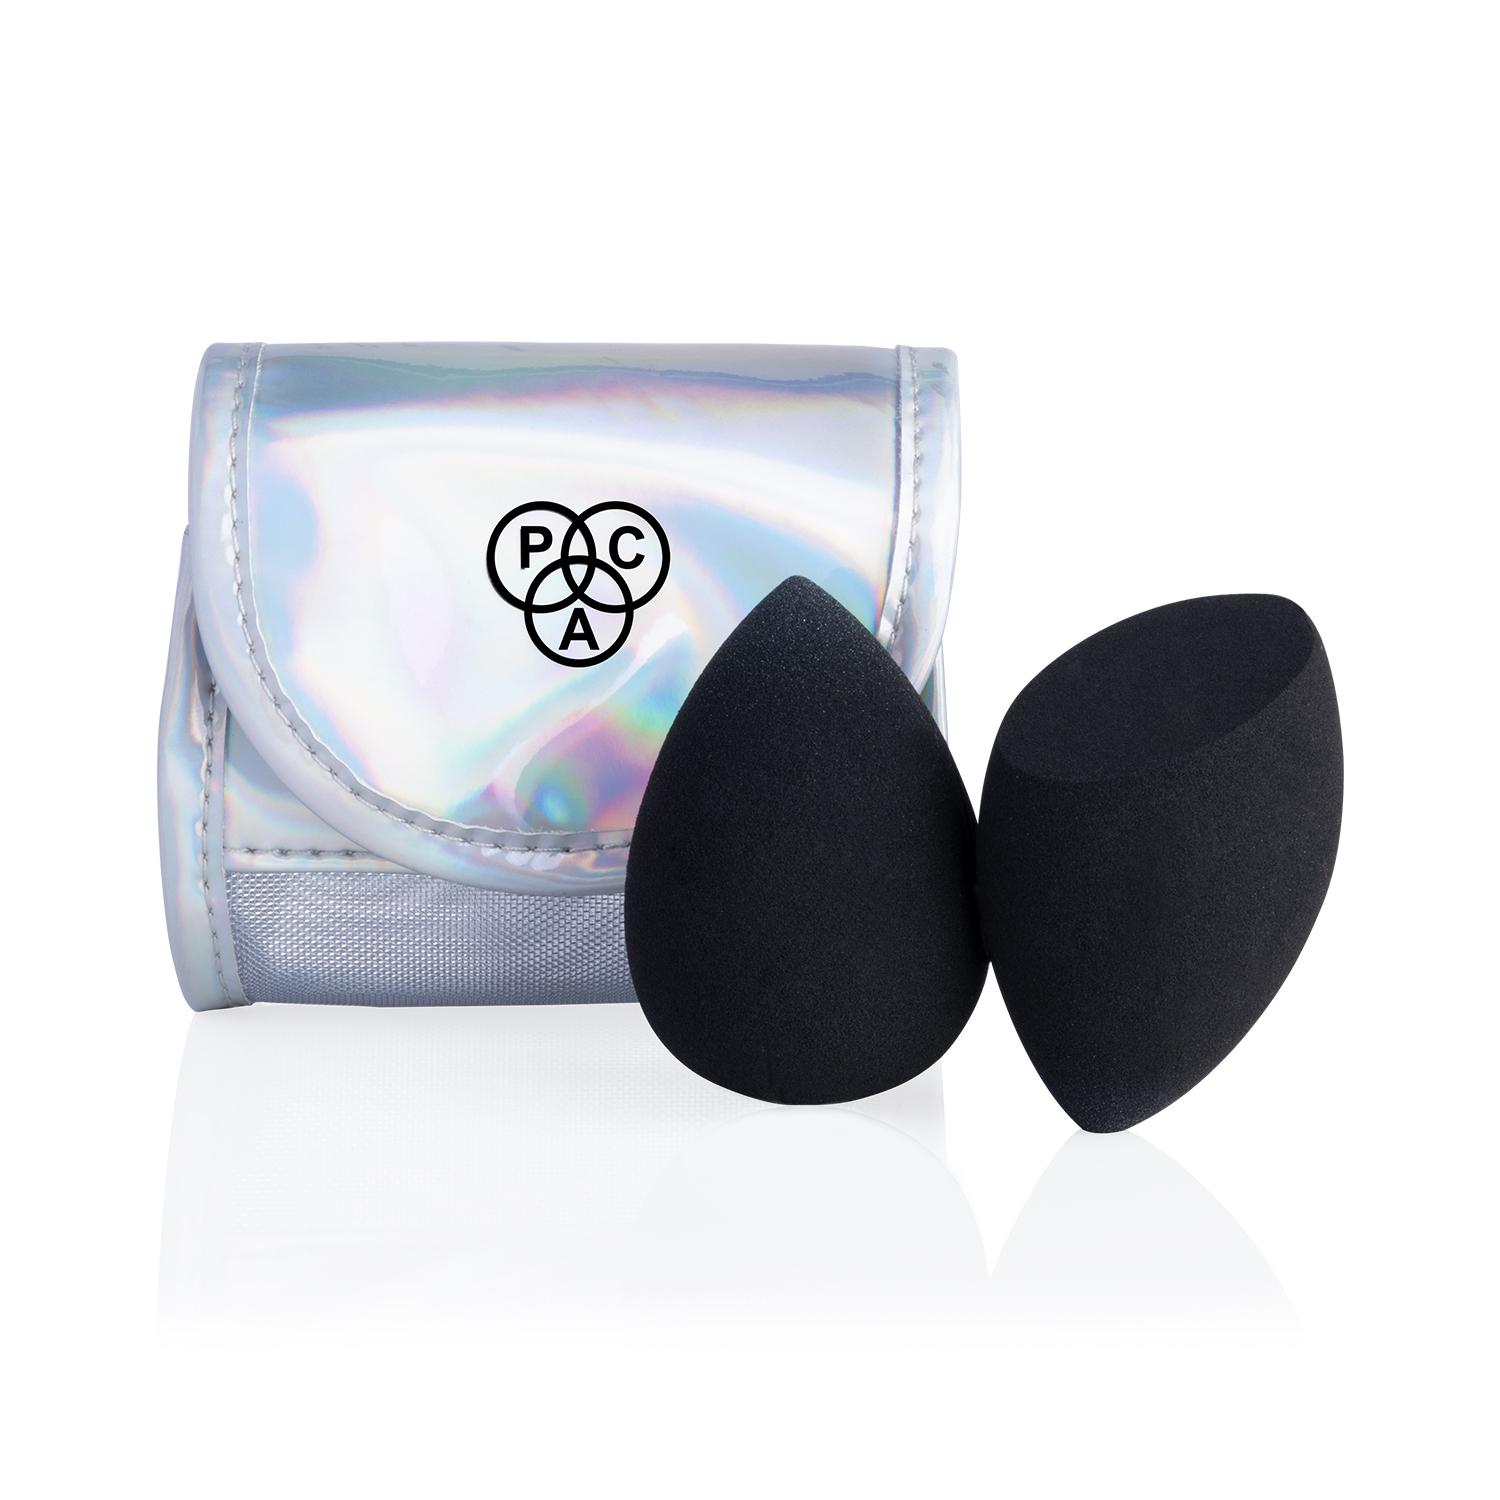 PAC | PAC Limited Edition Holographic Water Drop And Olive Cut 3D Sponge Set - (2Pcs)